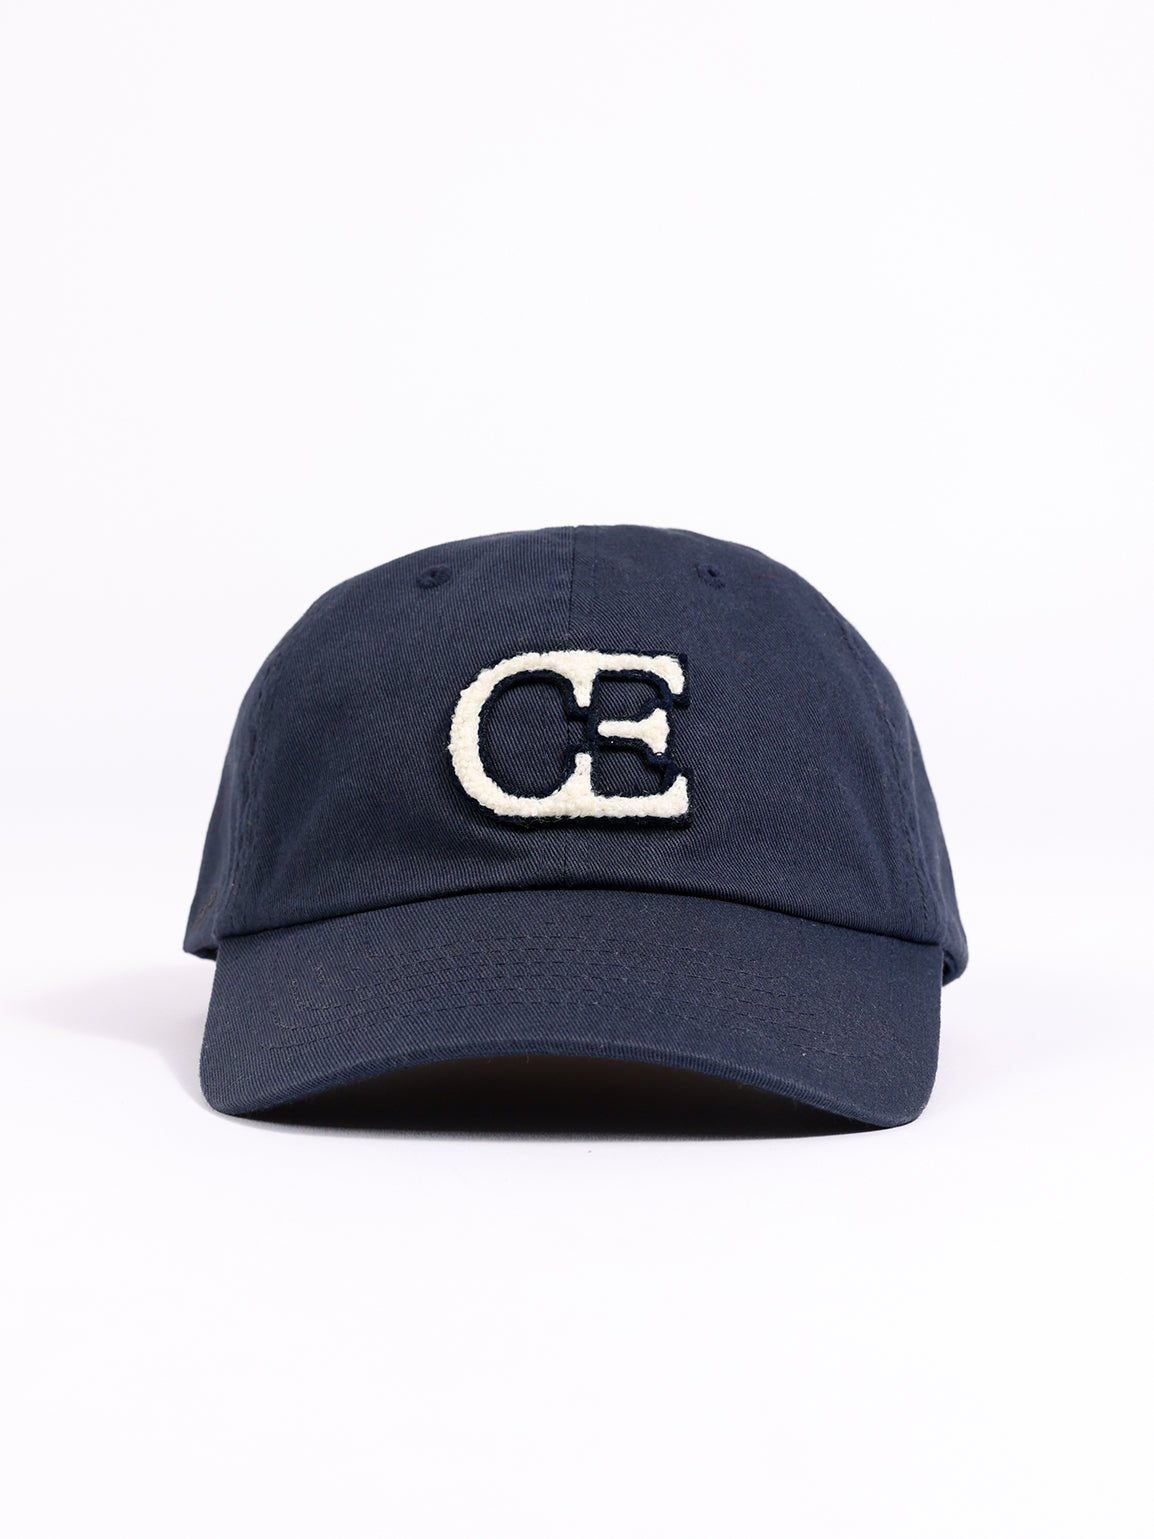 Wash navy vintage cap with white background 